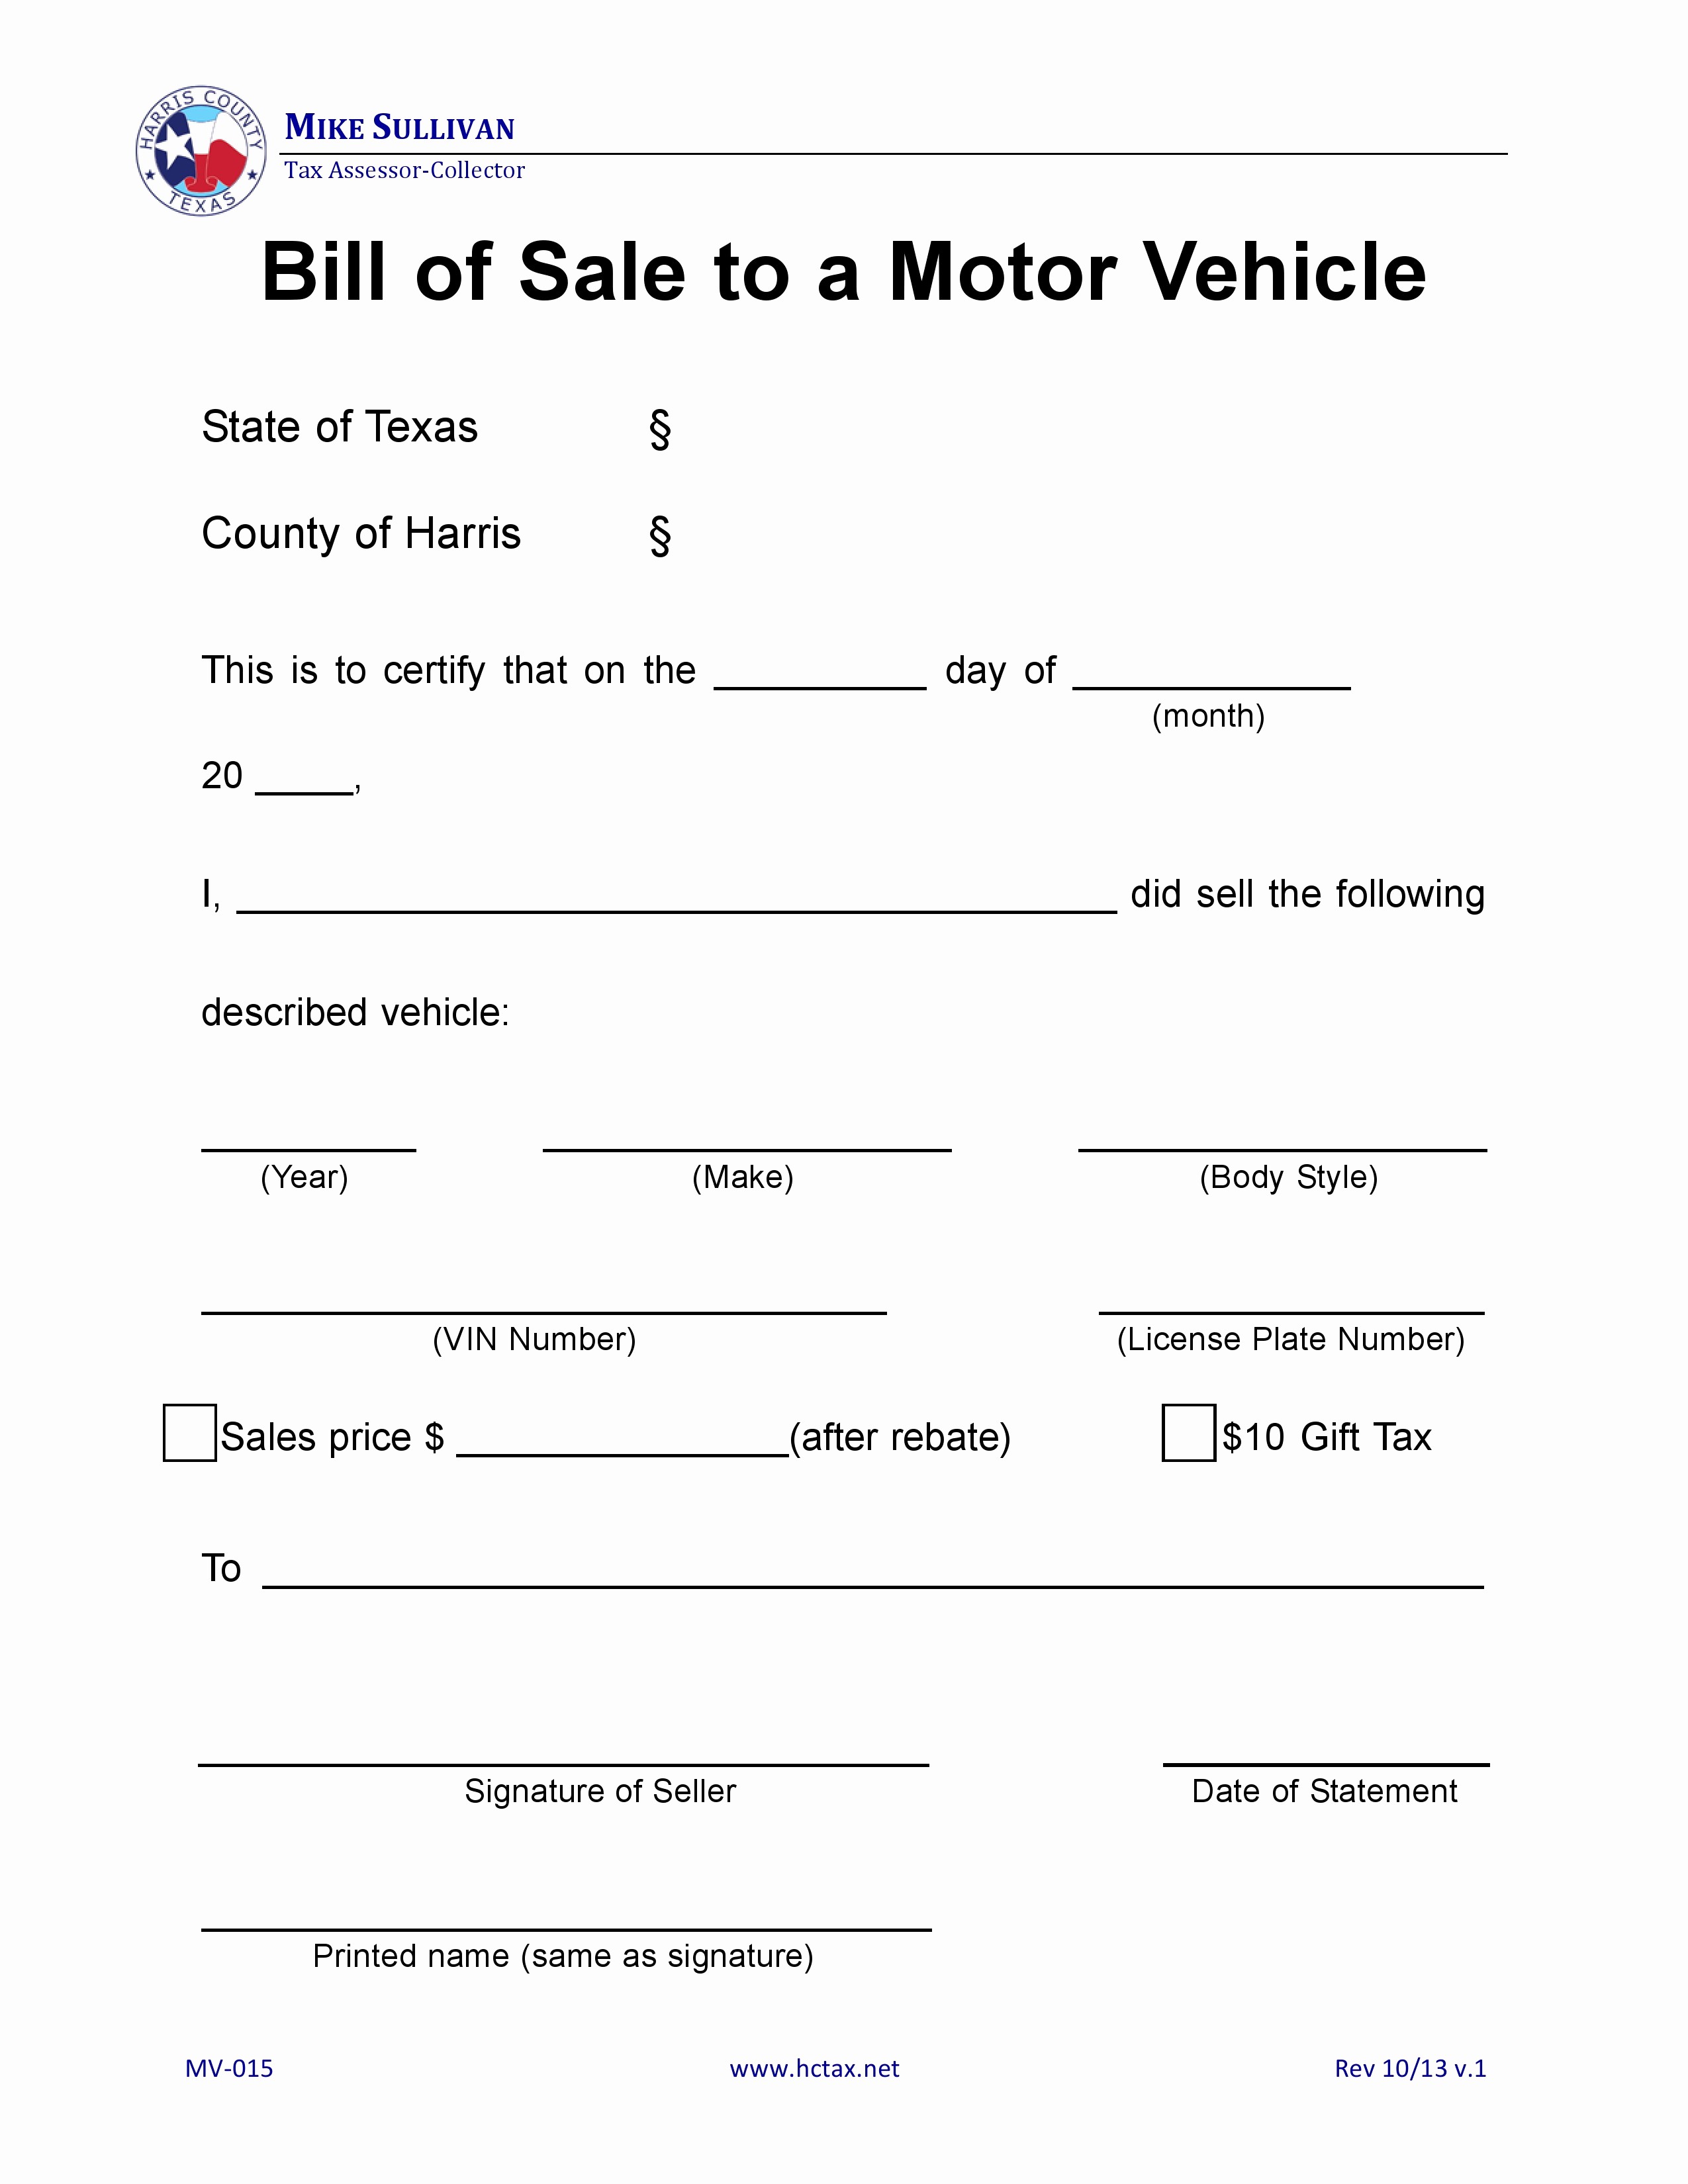 Bill Sell for A Car Beautiful Free Harris County Texas Motor Vehicle Bill Of Sale Mv